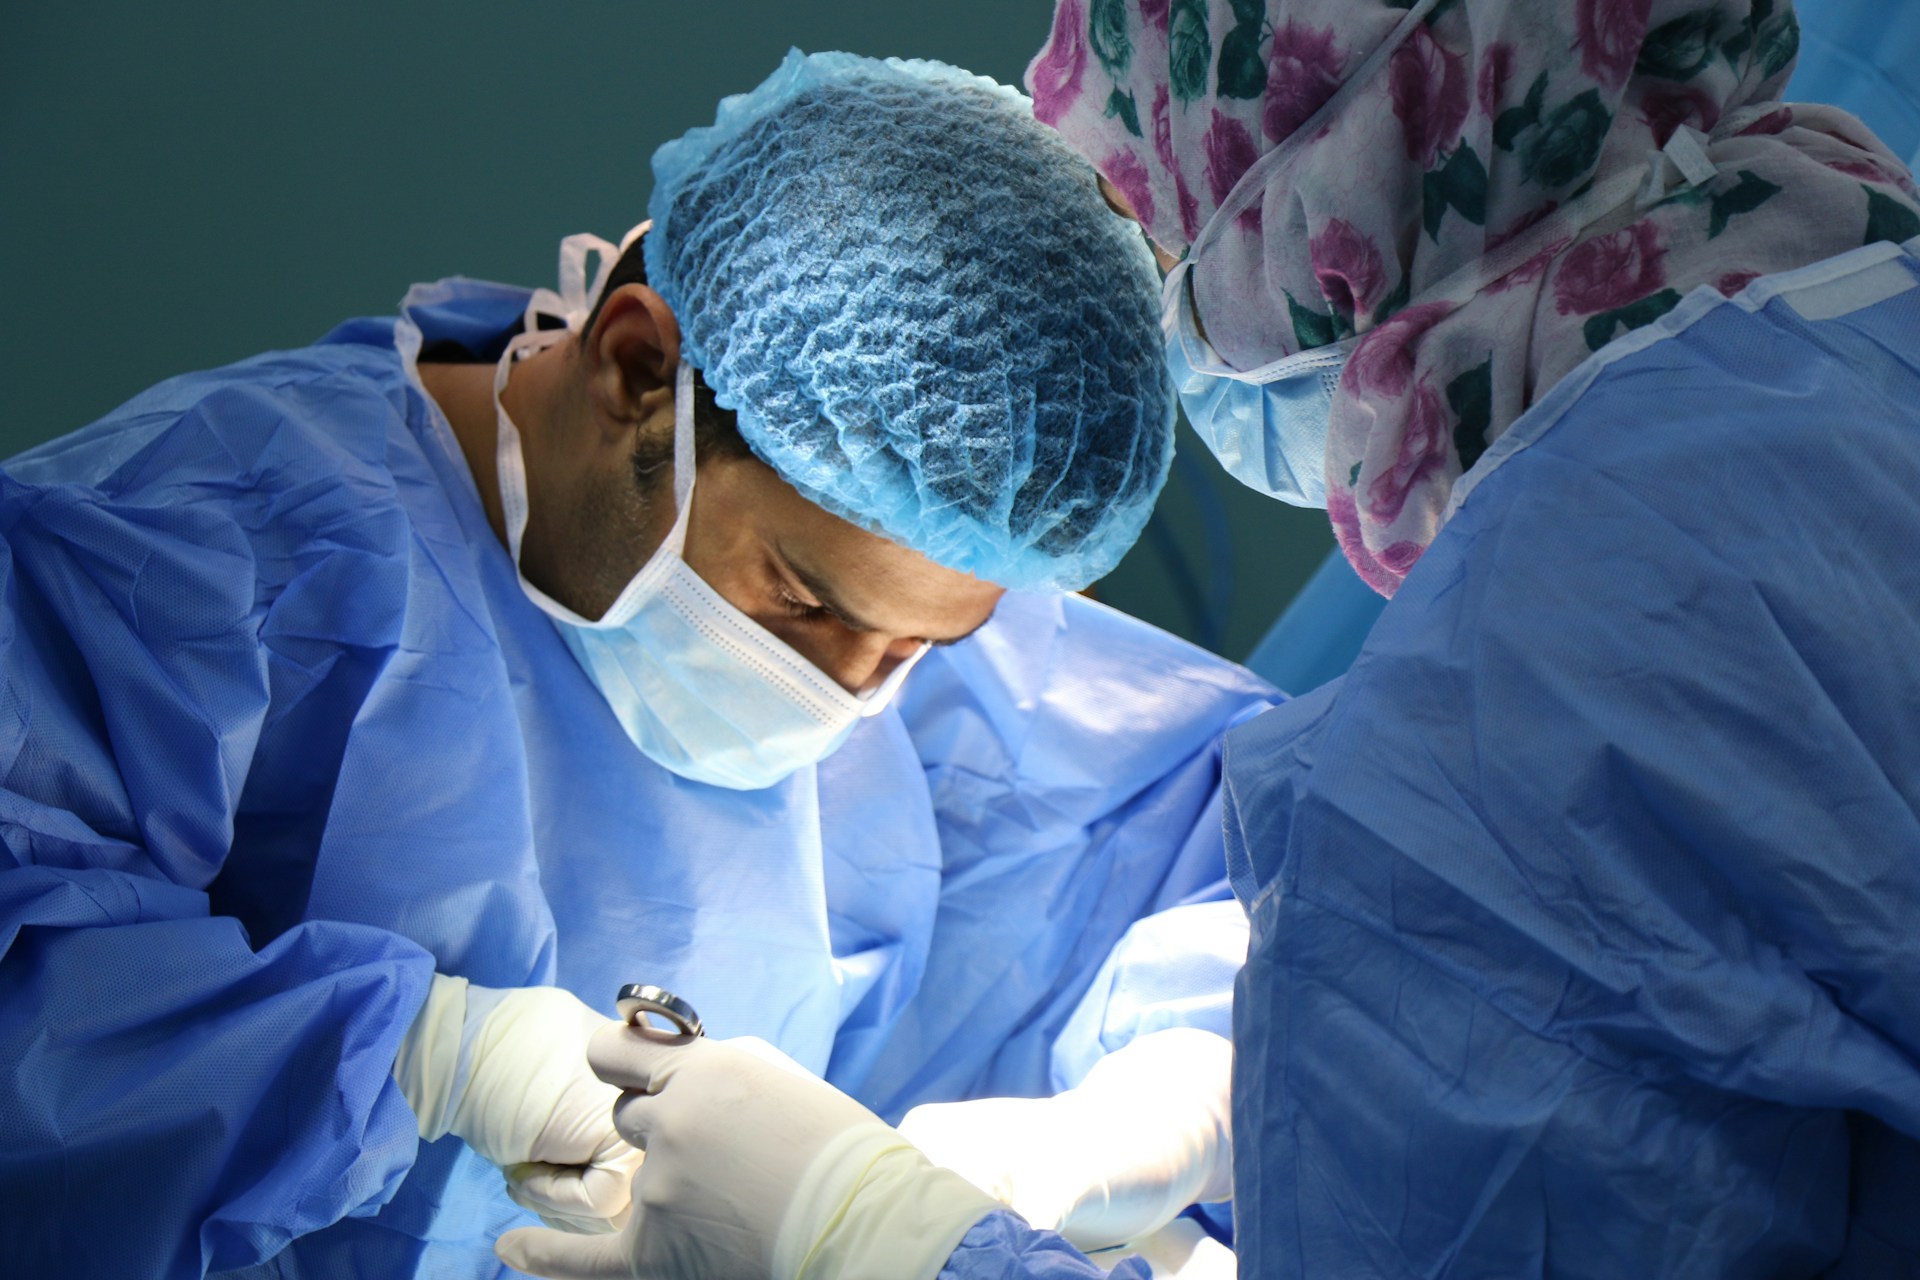 Male Plastic Surgery Procedures on the Rise